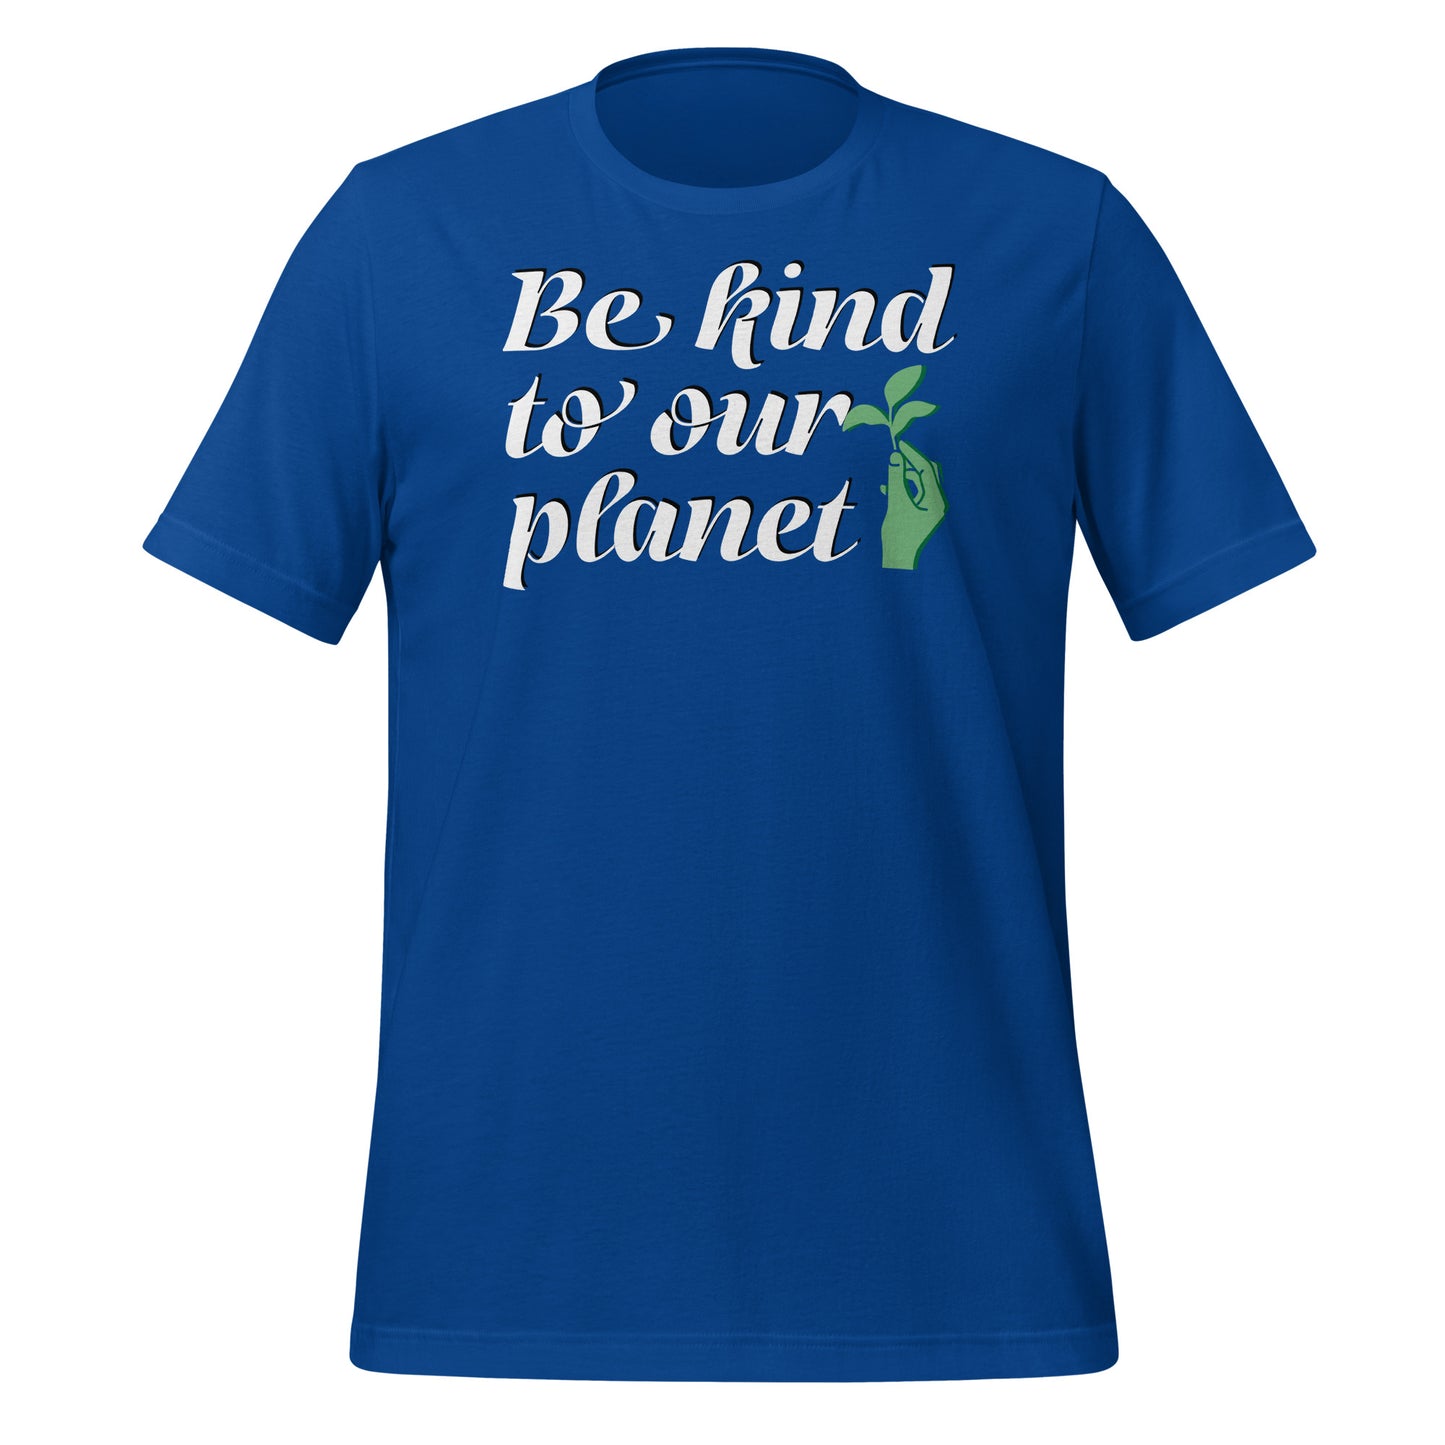 Be Kind To Our Planet: Eco-Friendly T-Shirts for Sustainable Style